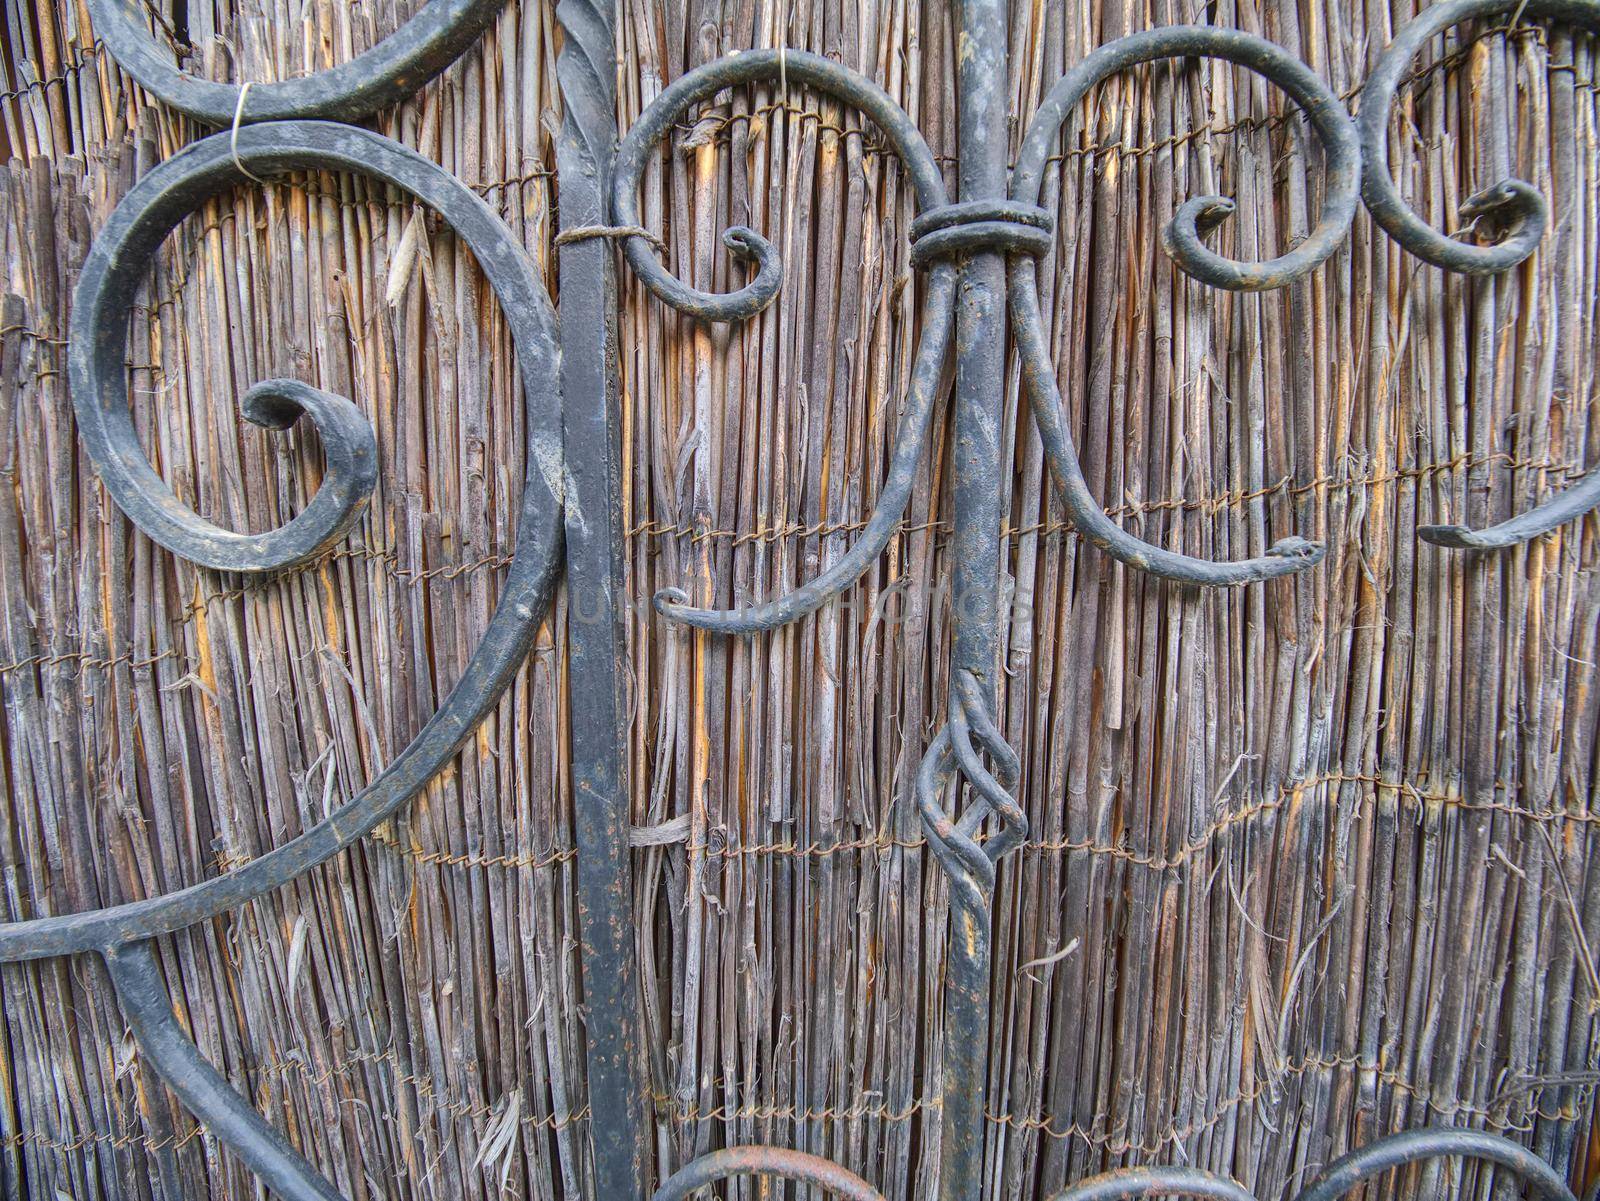 Ornaments in fence, wrought-iron gate. Traditional forging by rdonar2